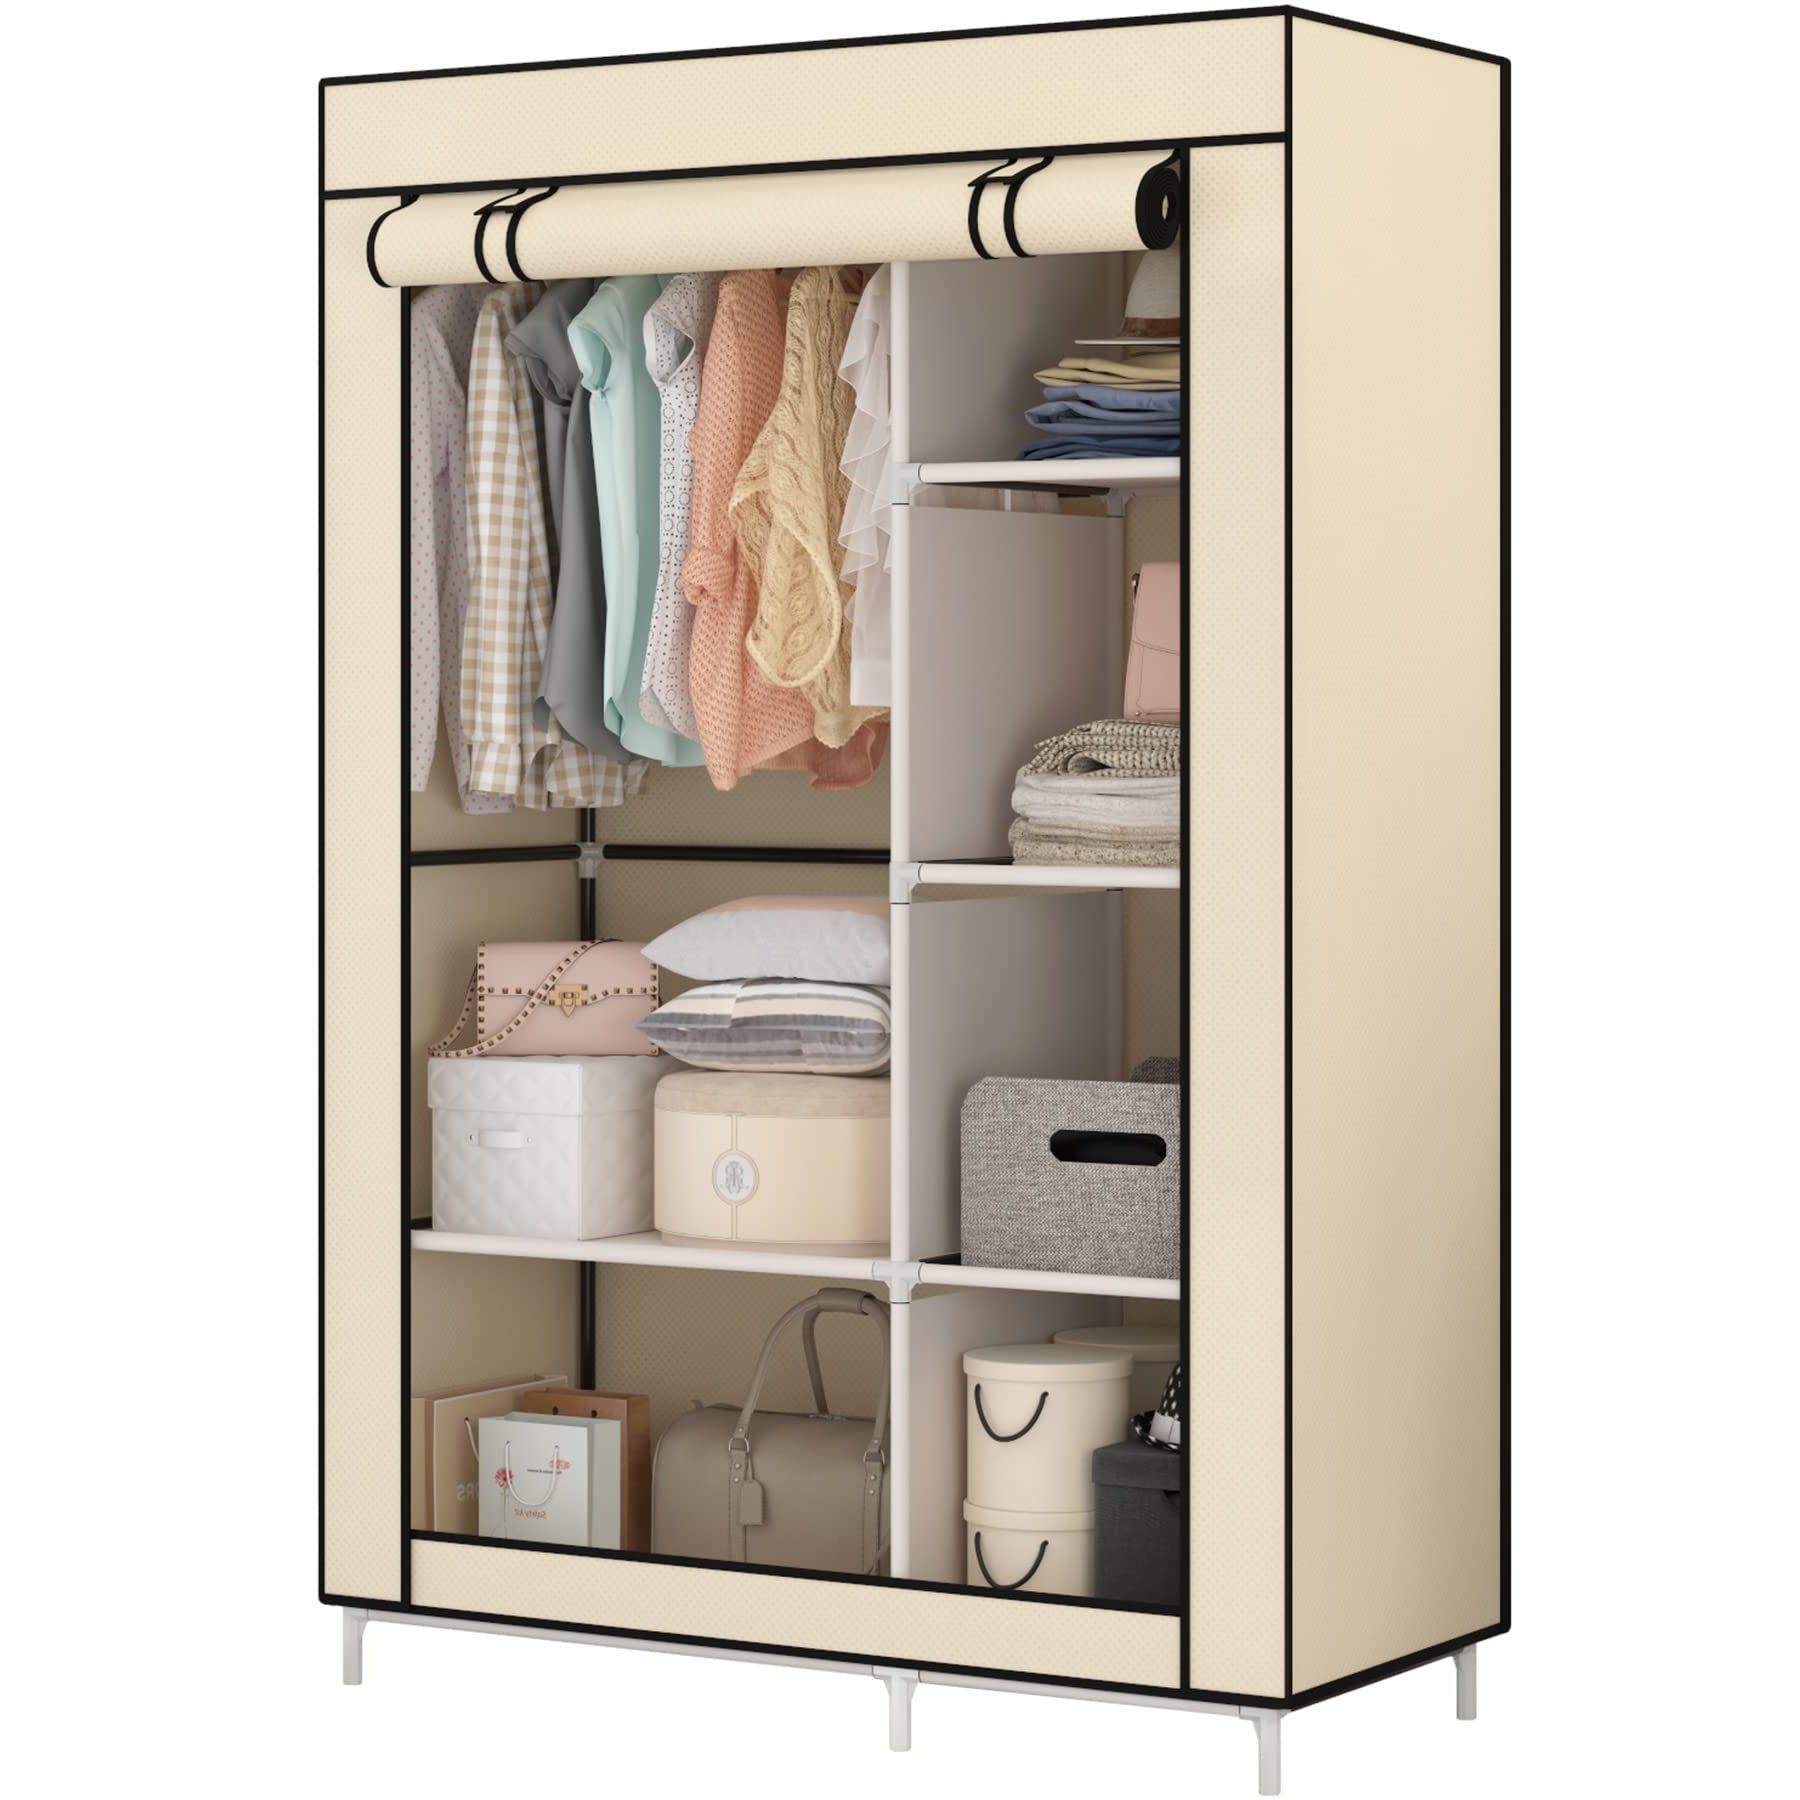 Current 6 Shelf Non Woven Wardrobes Throughout Amazon: Calmootey Closet Storage Organizer,portable Wardrobe With 6  Shelves And Clothes Rod,non Woven Fabric Cover With 4 Side Pockets,beige :  Home & Kitchen (Photo 4 of 10)